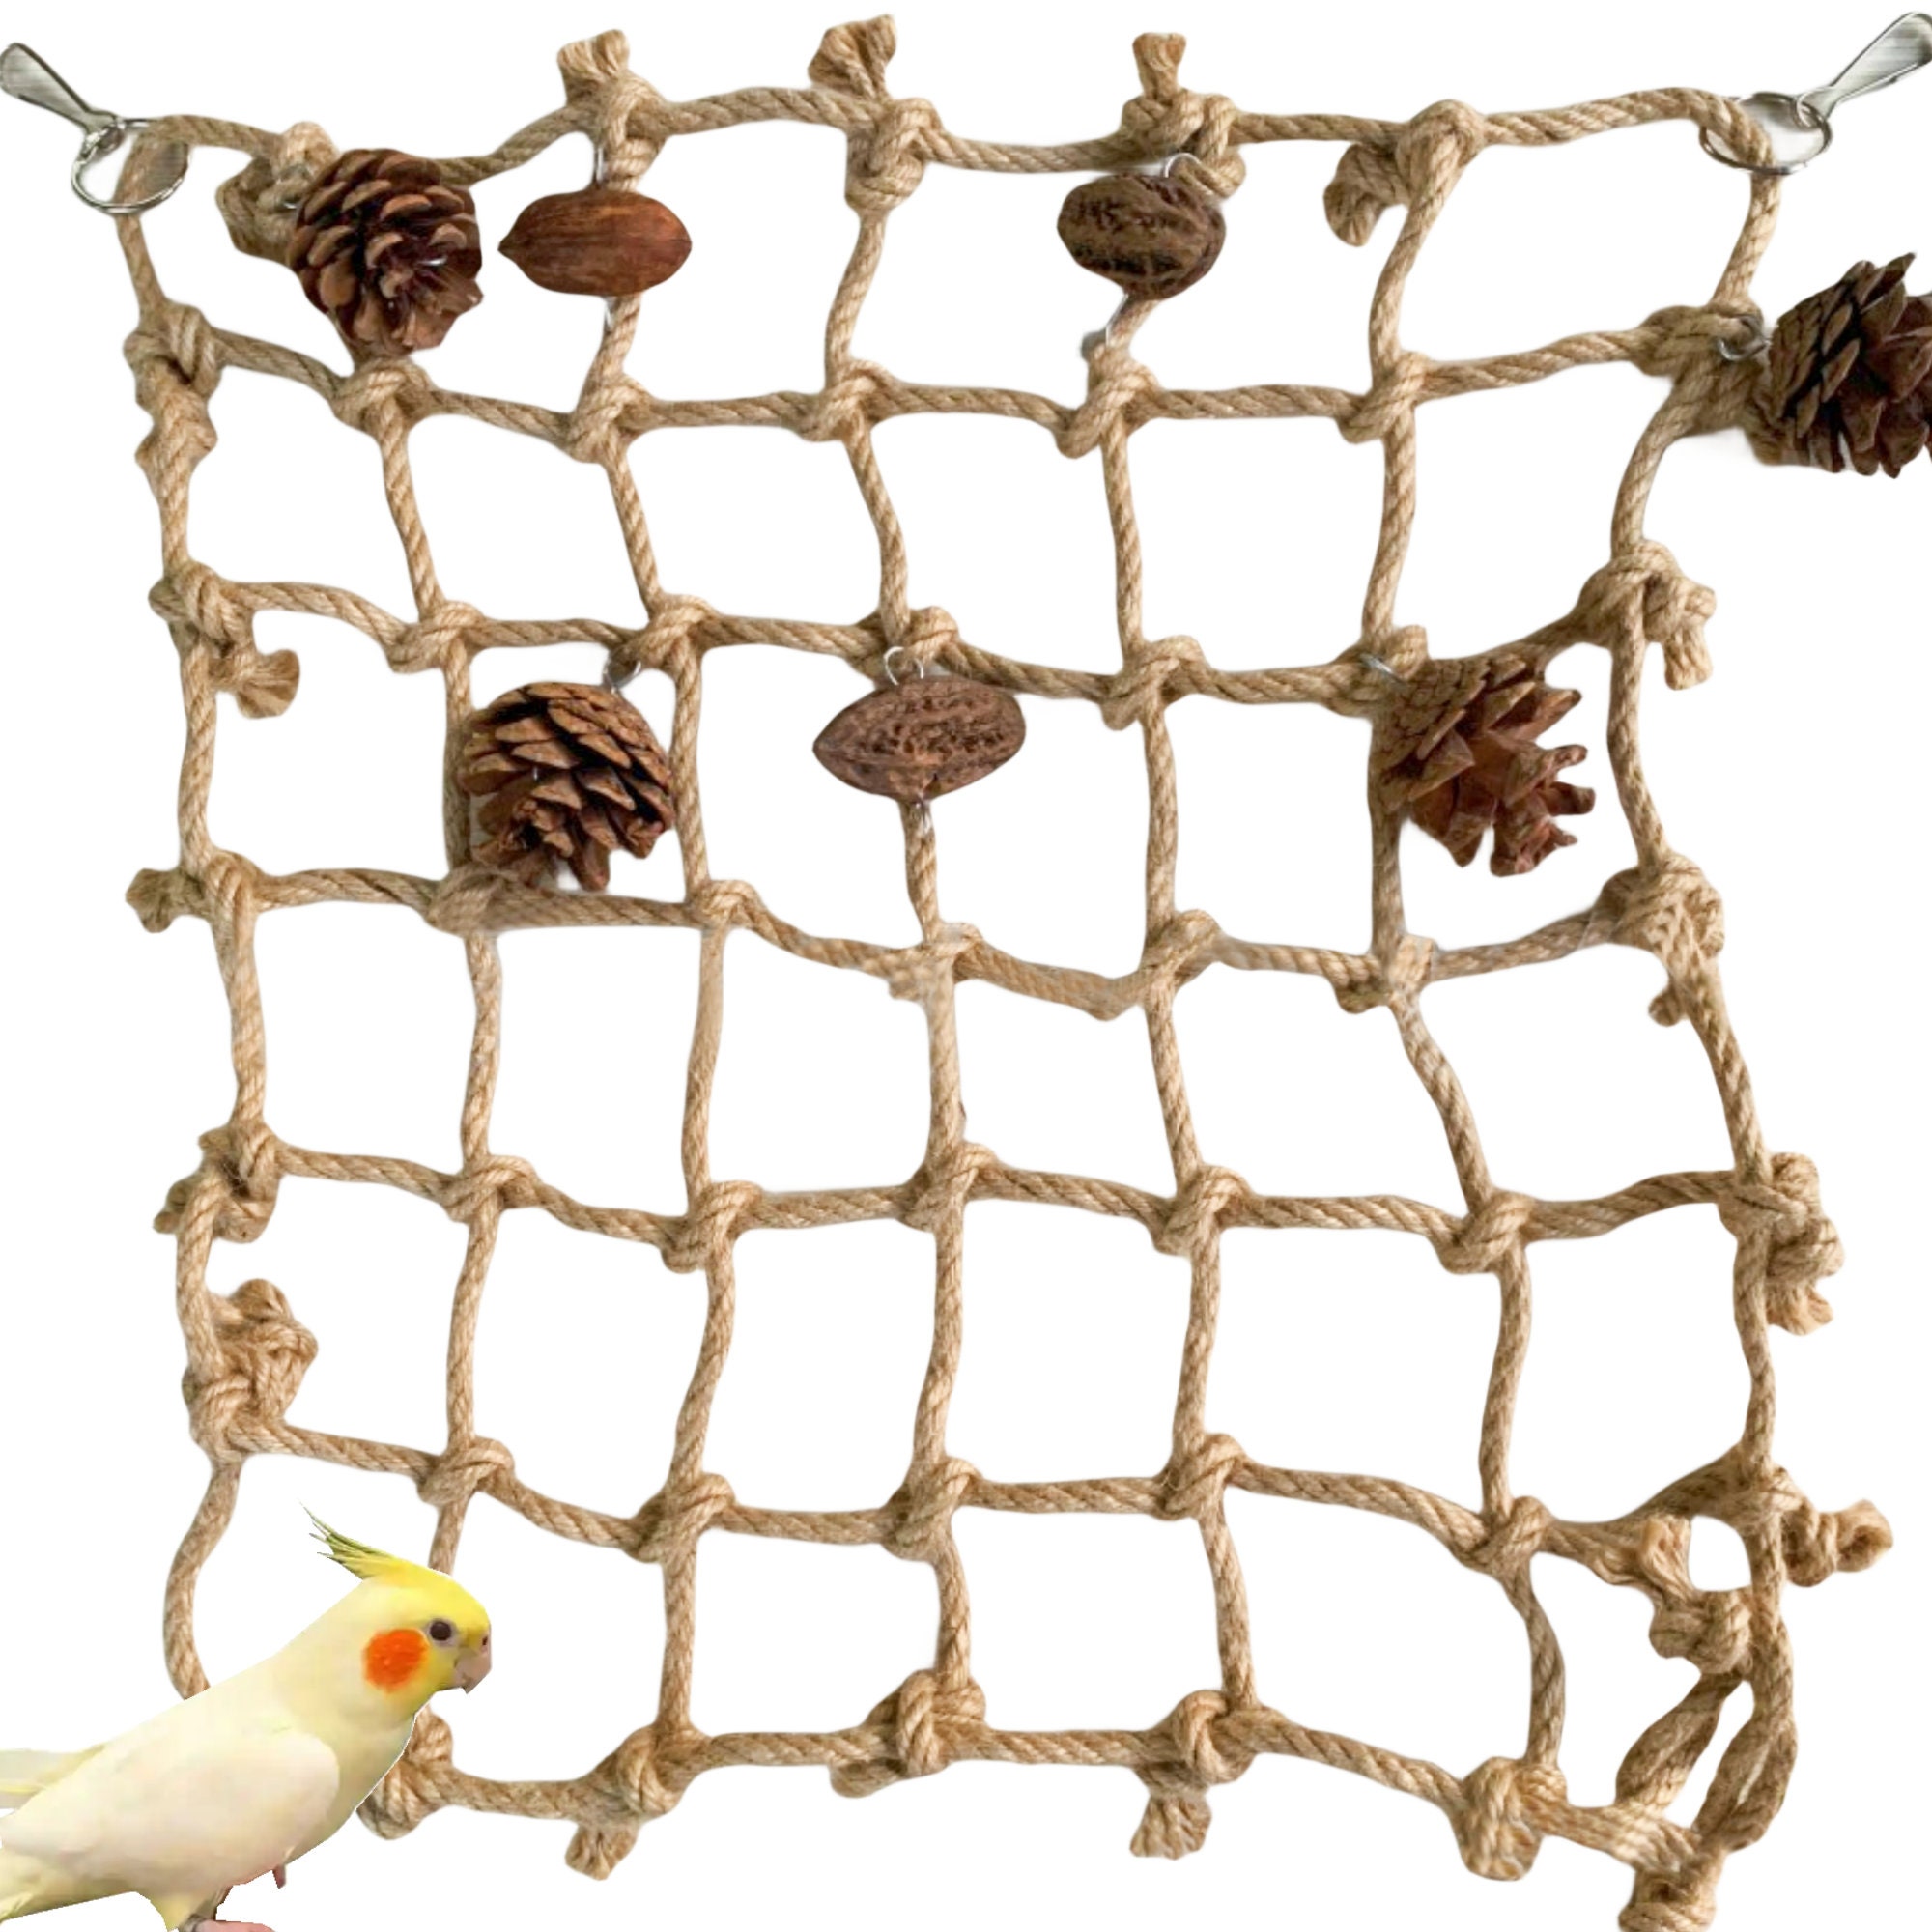 Mygeromon bird rope perch for parrots, cockatiels, parakeets, budgie cages  comfy birds colorful rope perches toy (